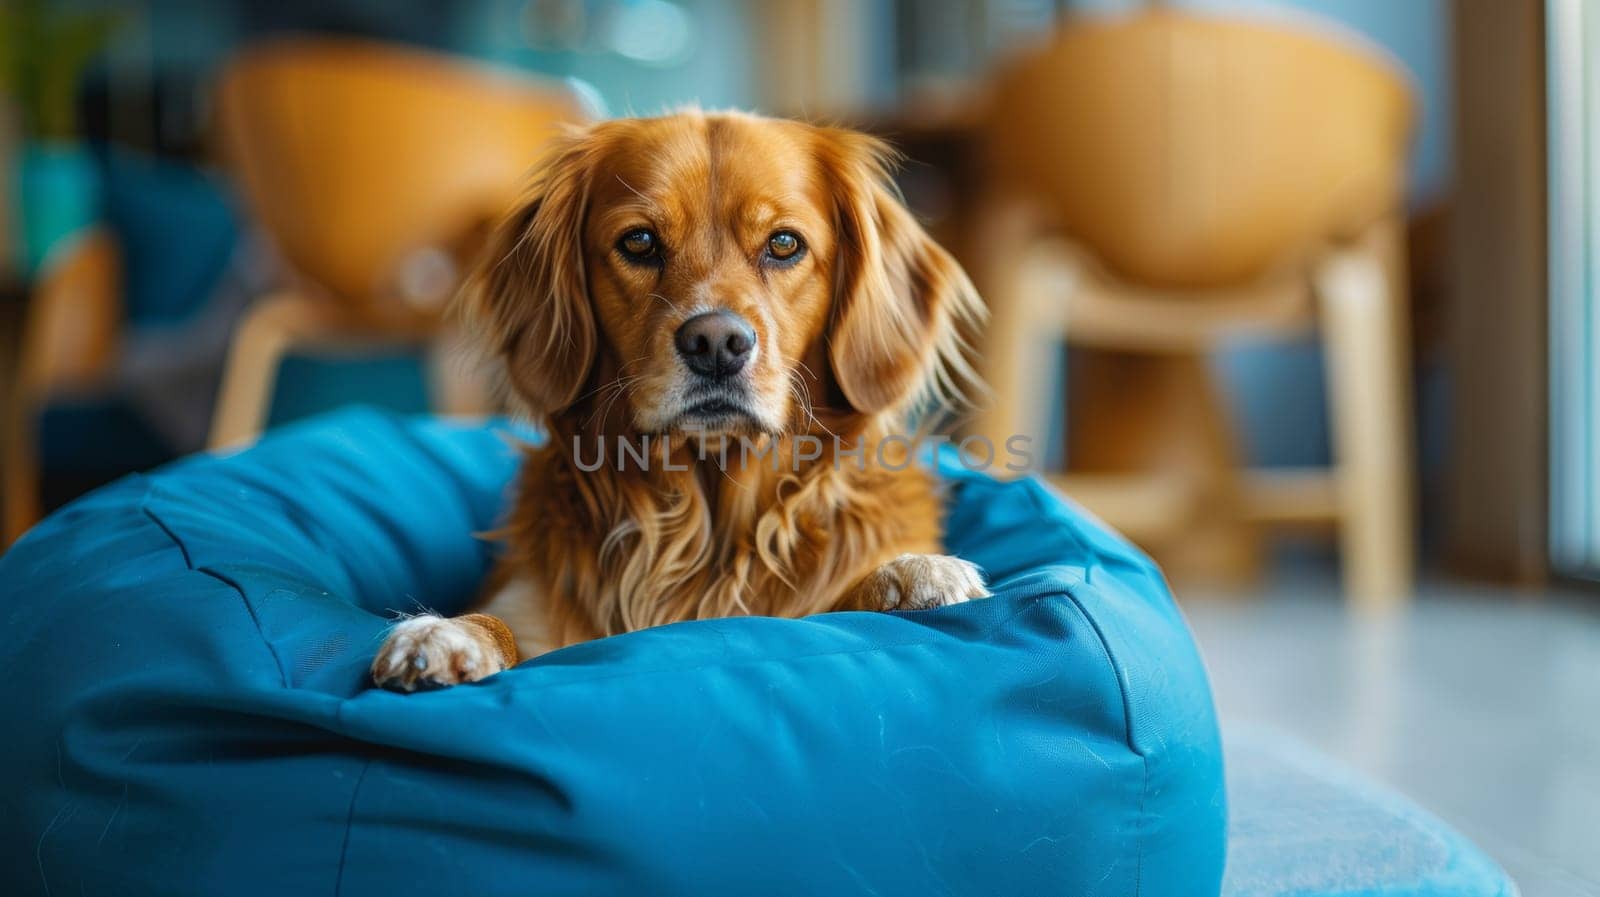 A dog sitting in a blue bean bag on the floor